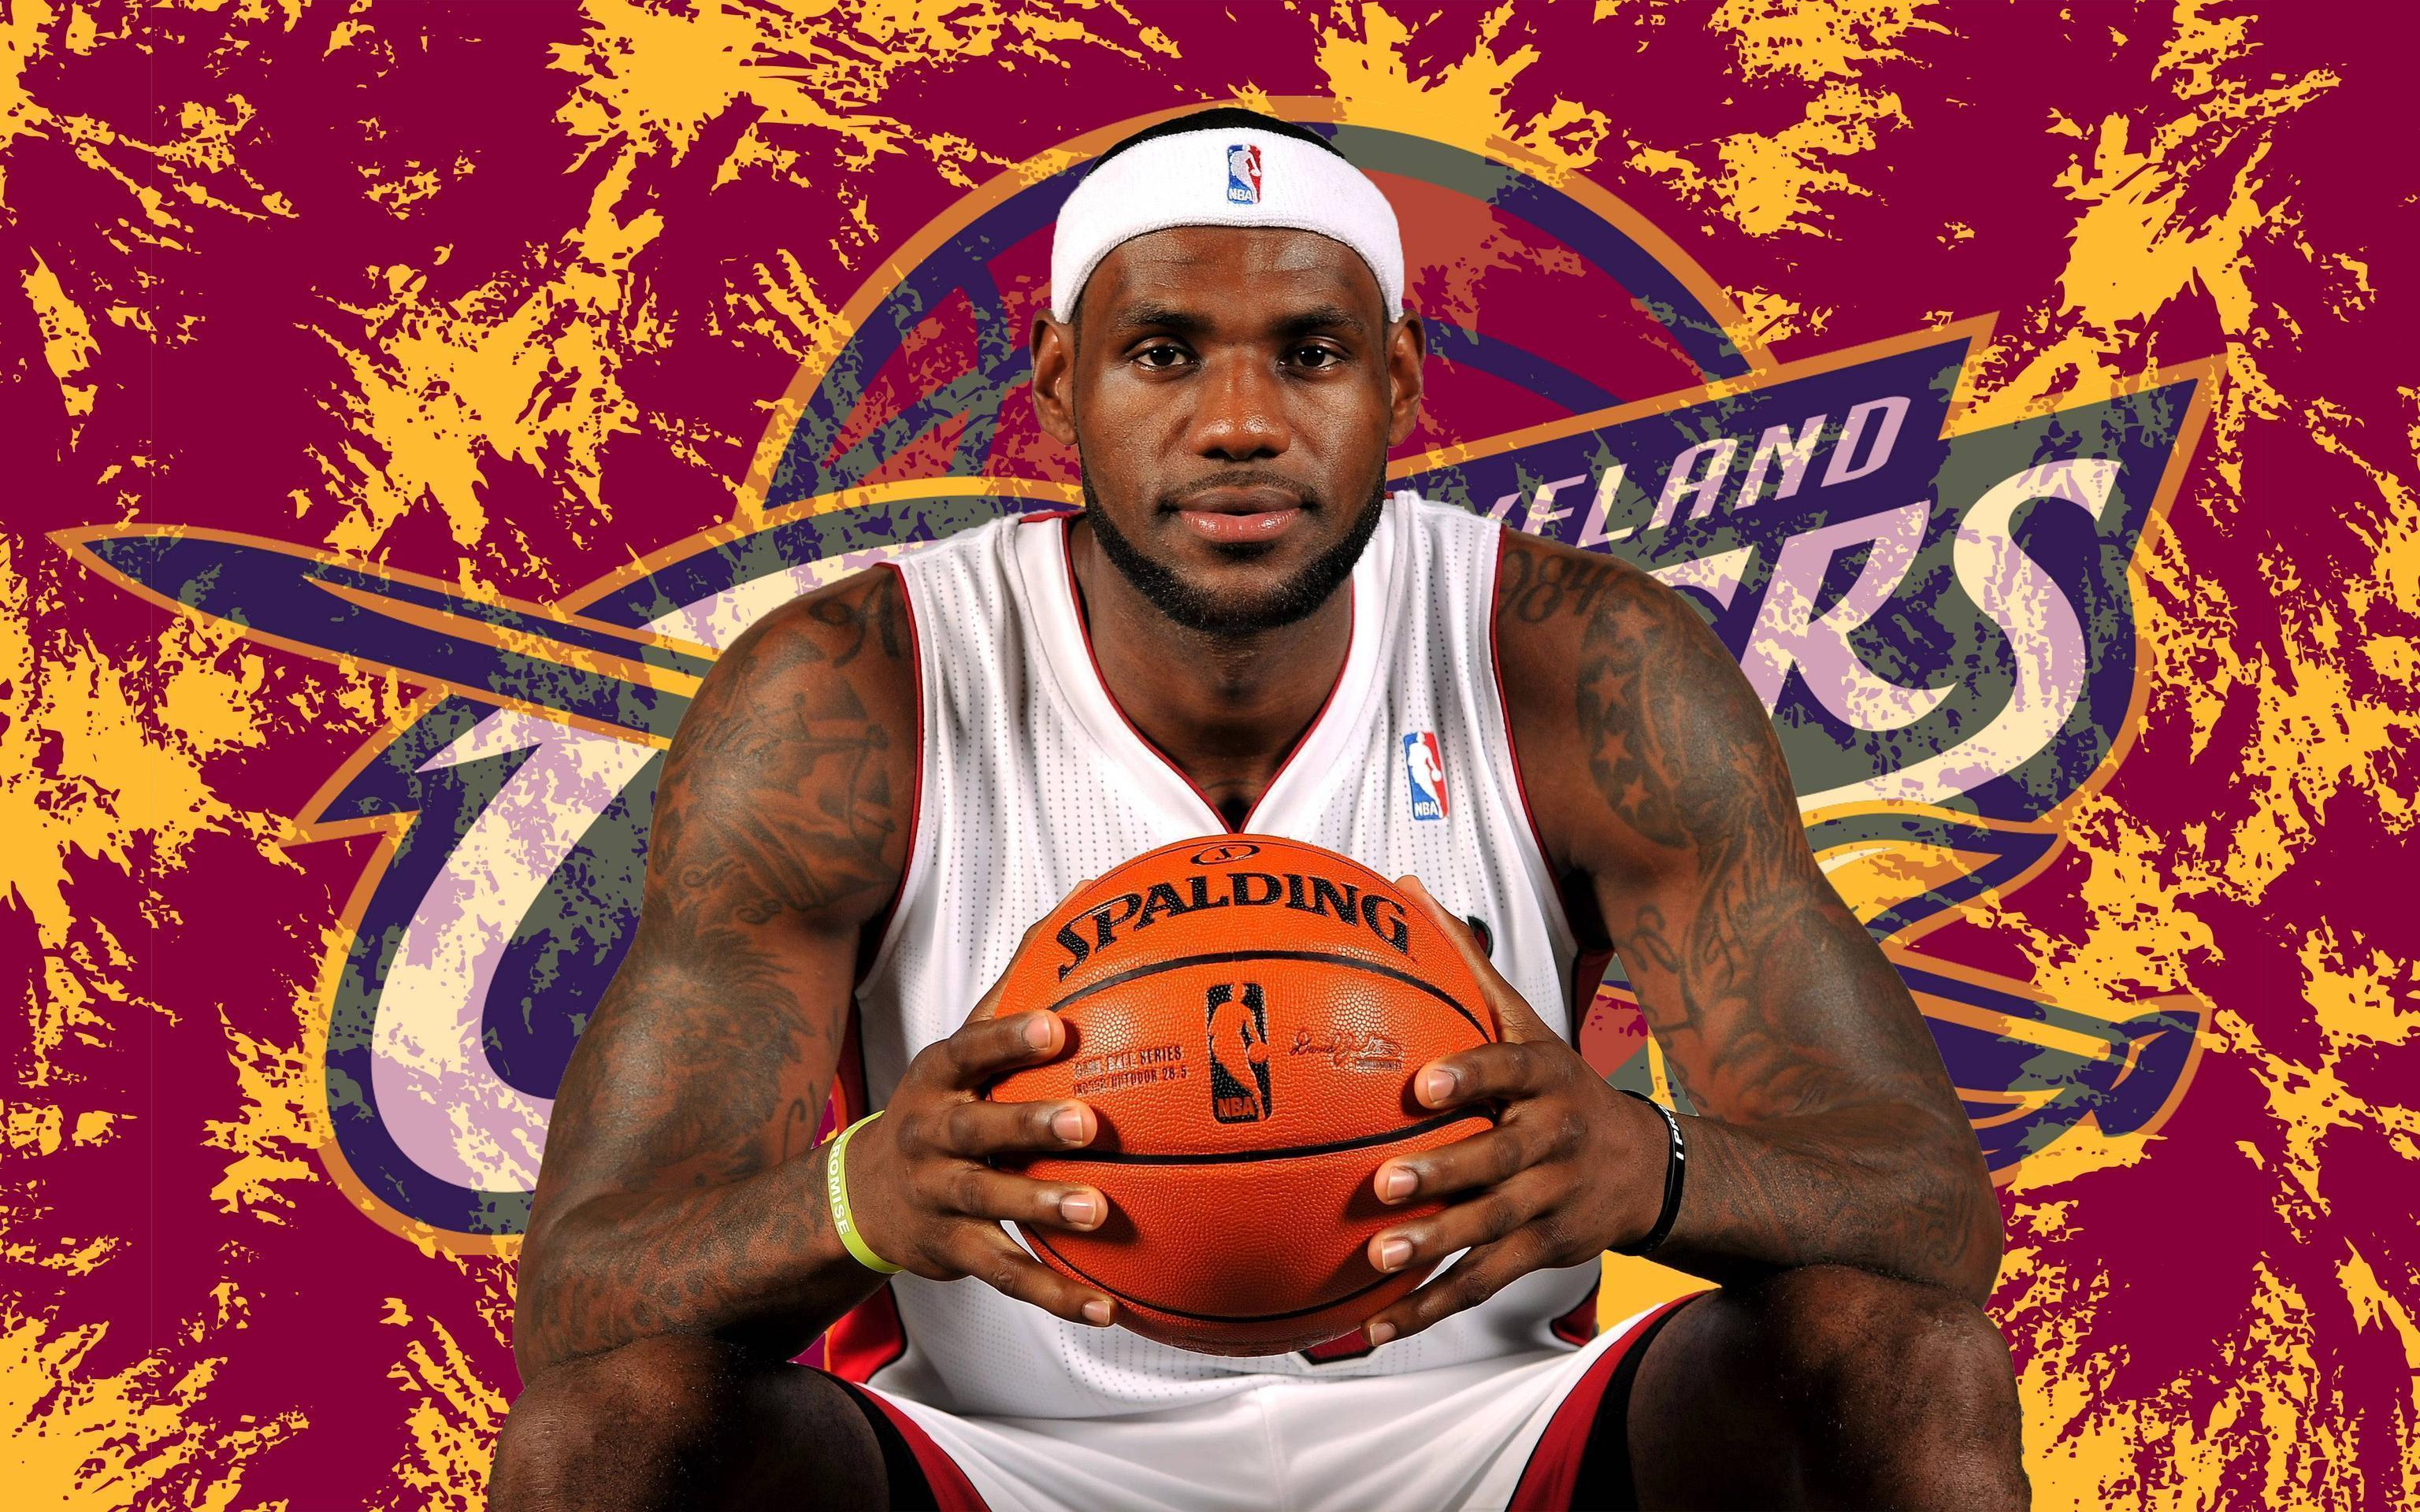 LeBron James 2014 Cleveland Cavaliers Wallpaper Wide or HD. Male